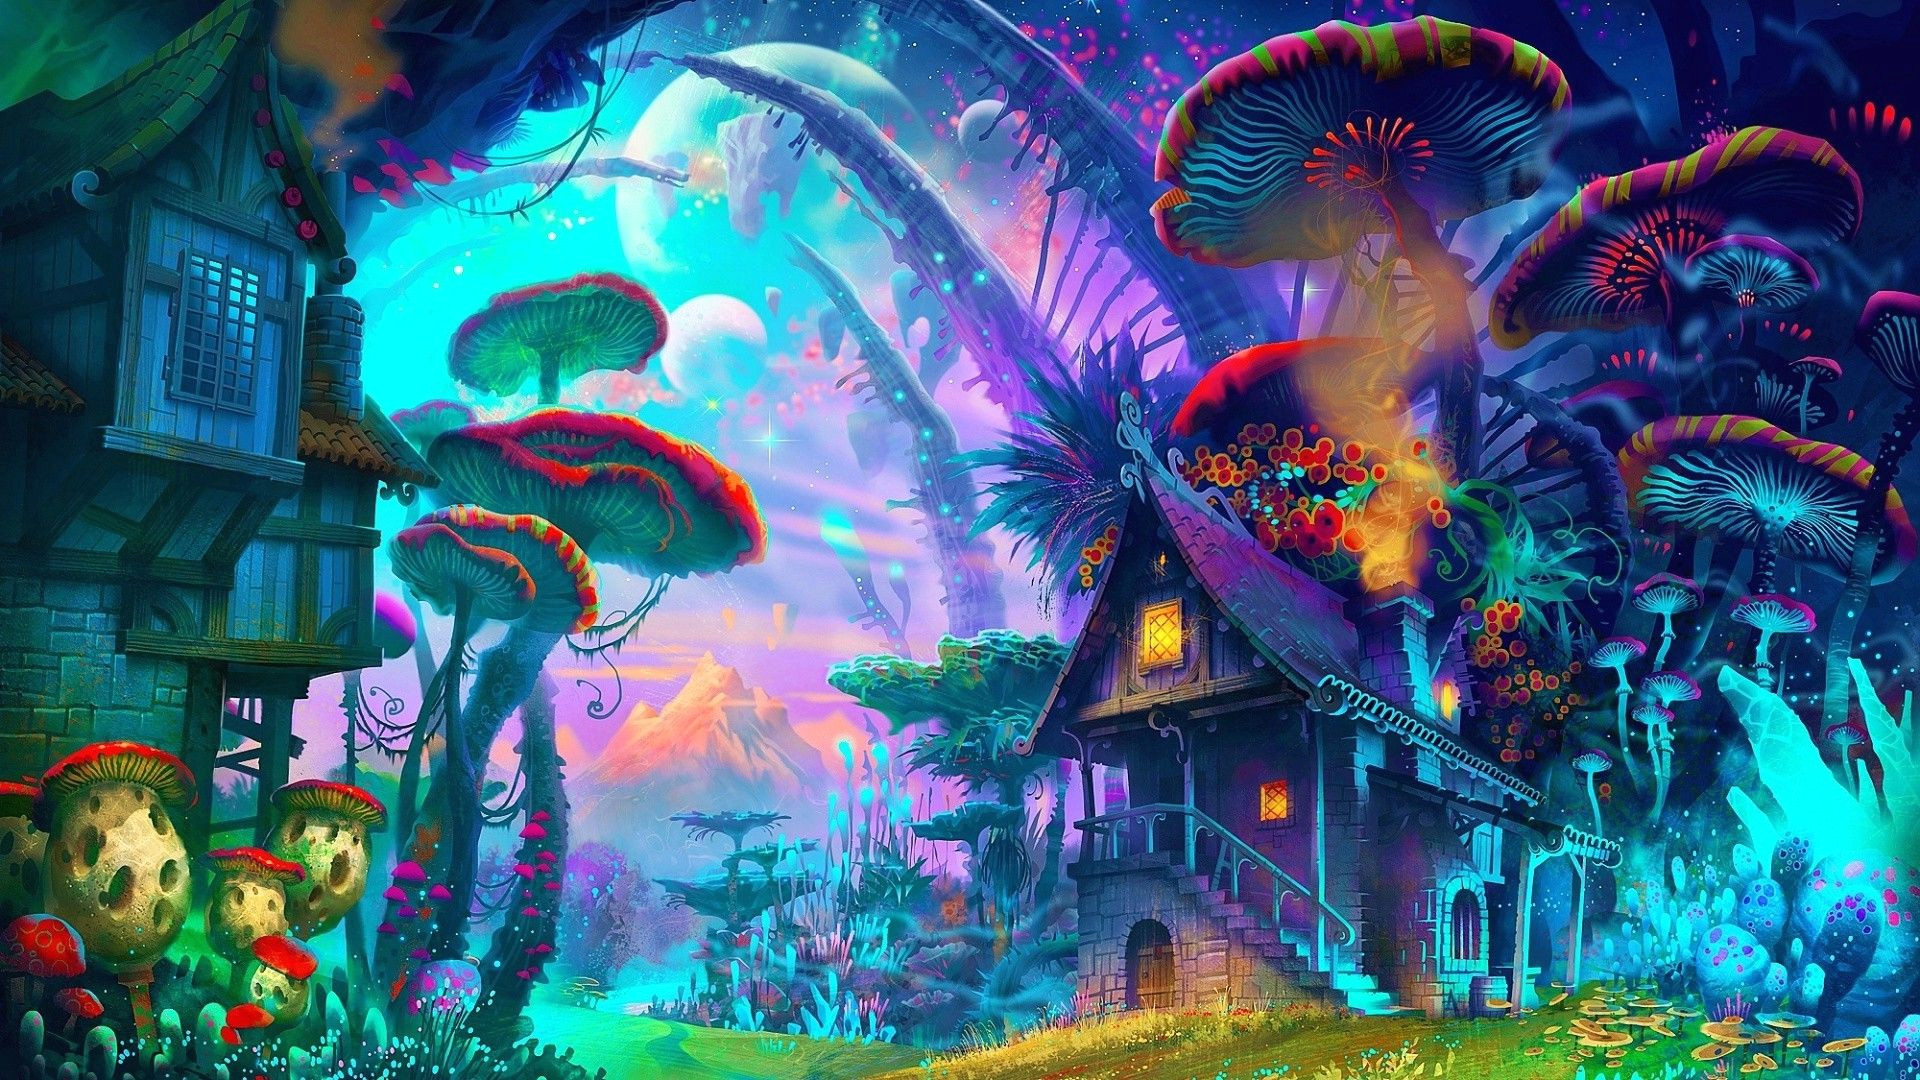 Drawing Ideas Nature Colourful Fantasy Art Drawing Nature Psychedelic Colorful House Mushroom